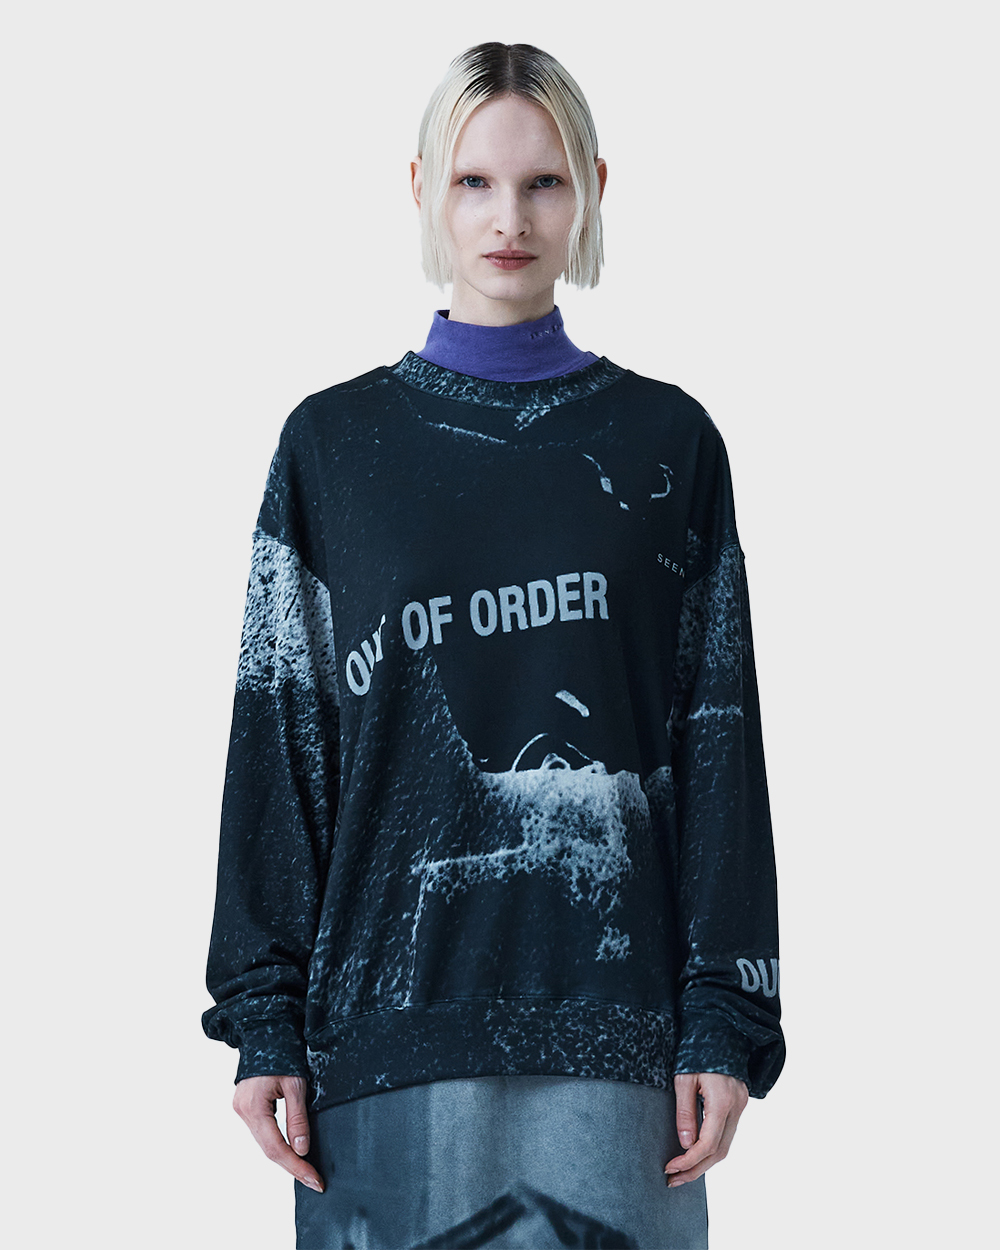 Out Of Order Knit Sweatshirts (Black)